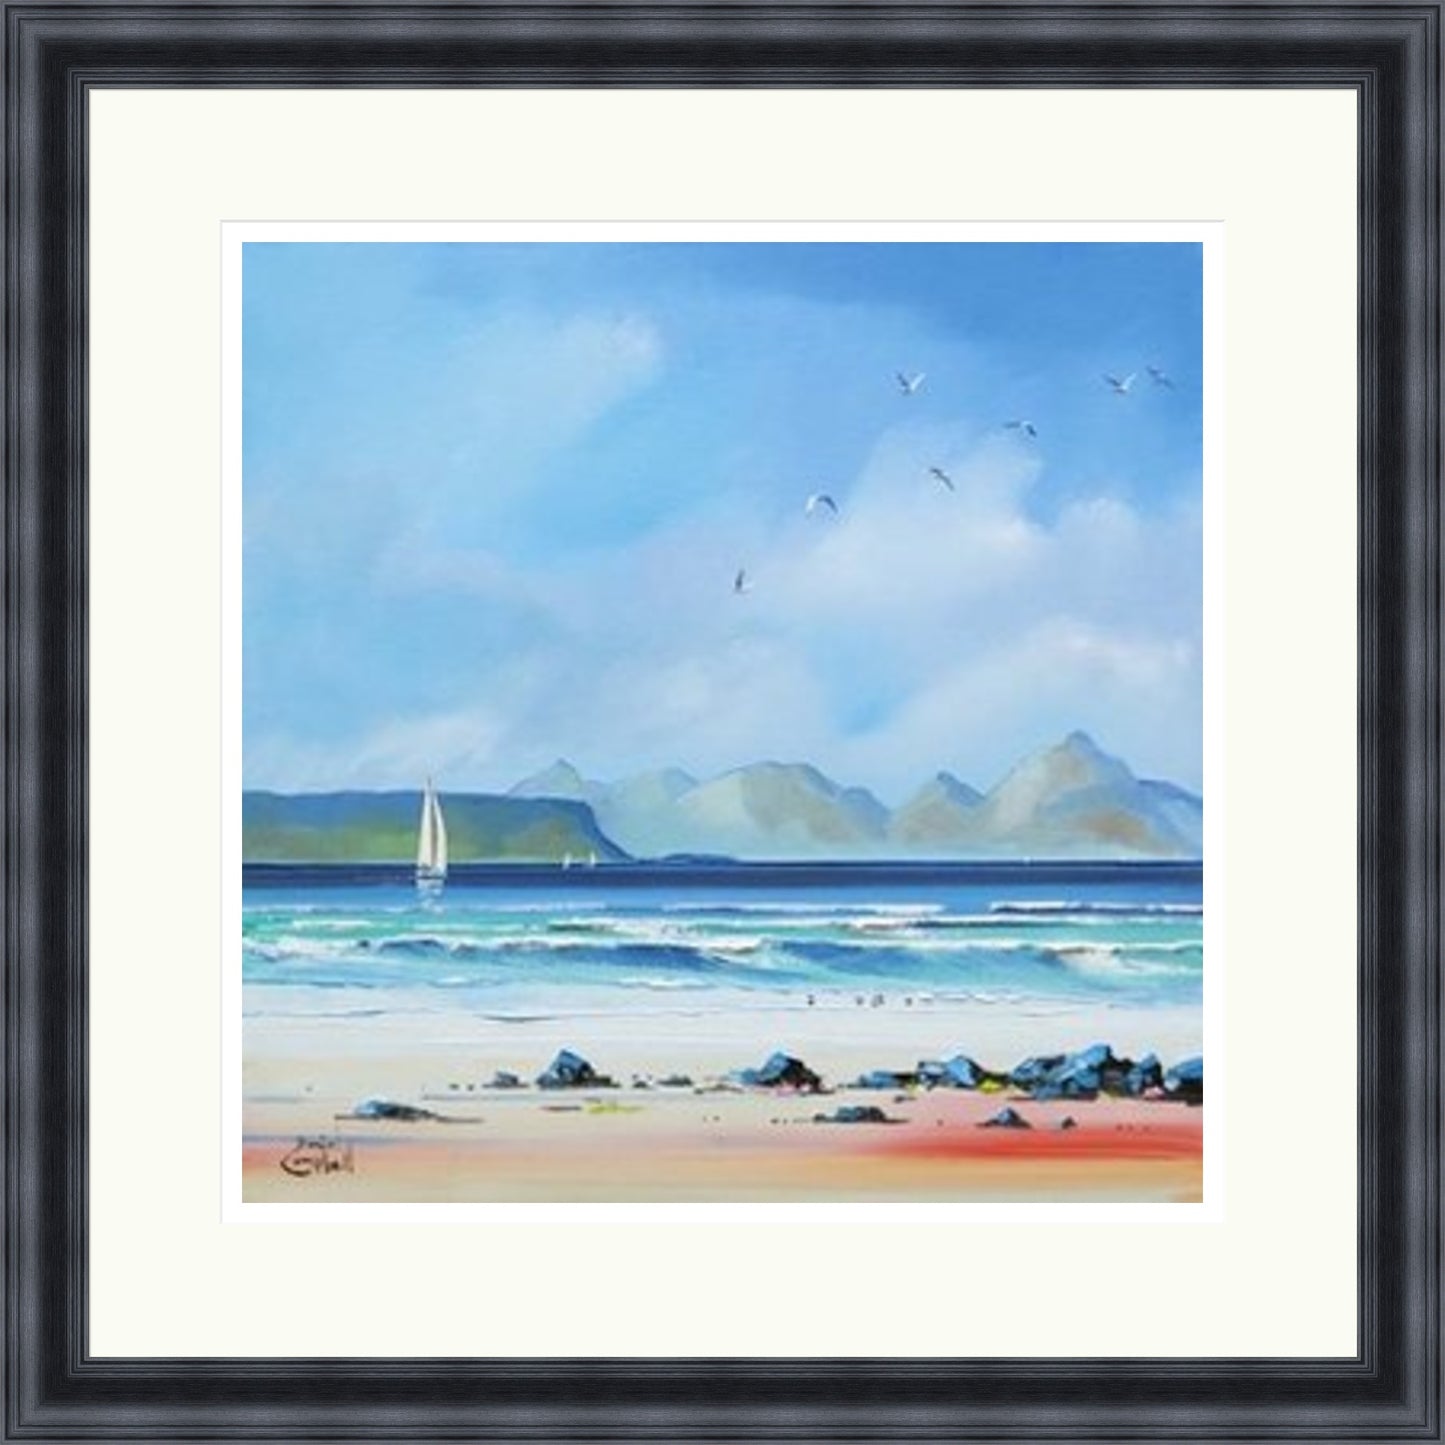 Sailing by Eigg by Daniel Campbell